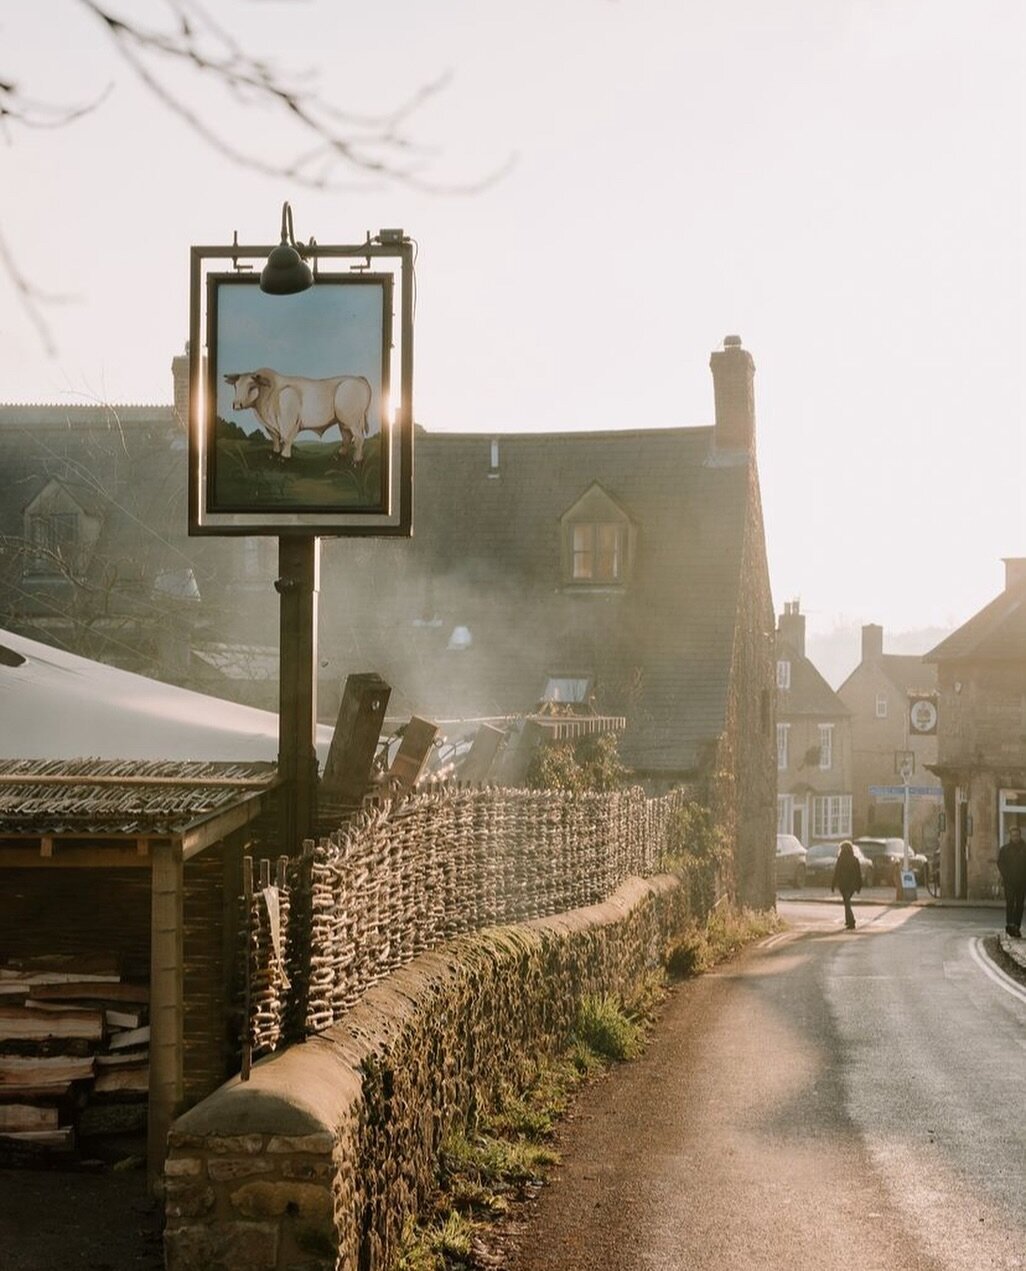 Oxfordshire&rsquo;s pub scene is as diverse as its landscapes. From historic taverns to riverside retreats, each pub in this picturesque county tells a story of tradition, community, and the timeless allure of English pub culture.

We&rsquo;ve recent